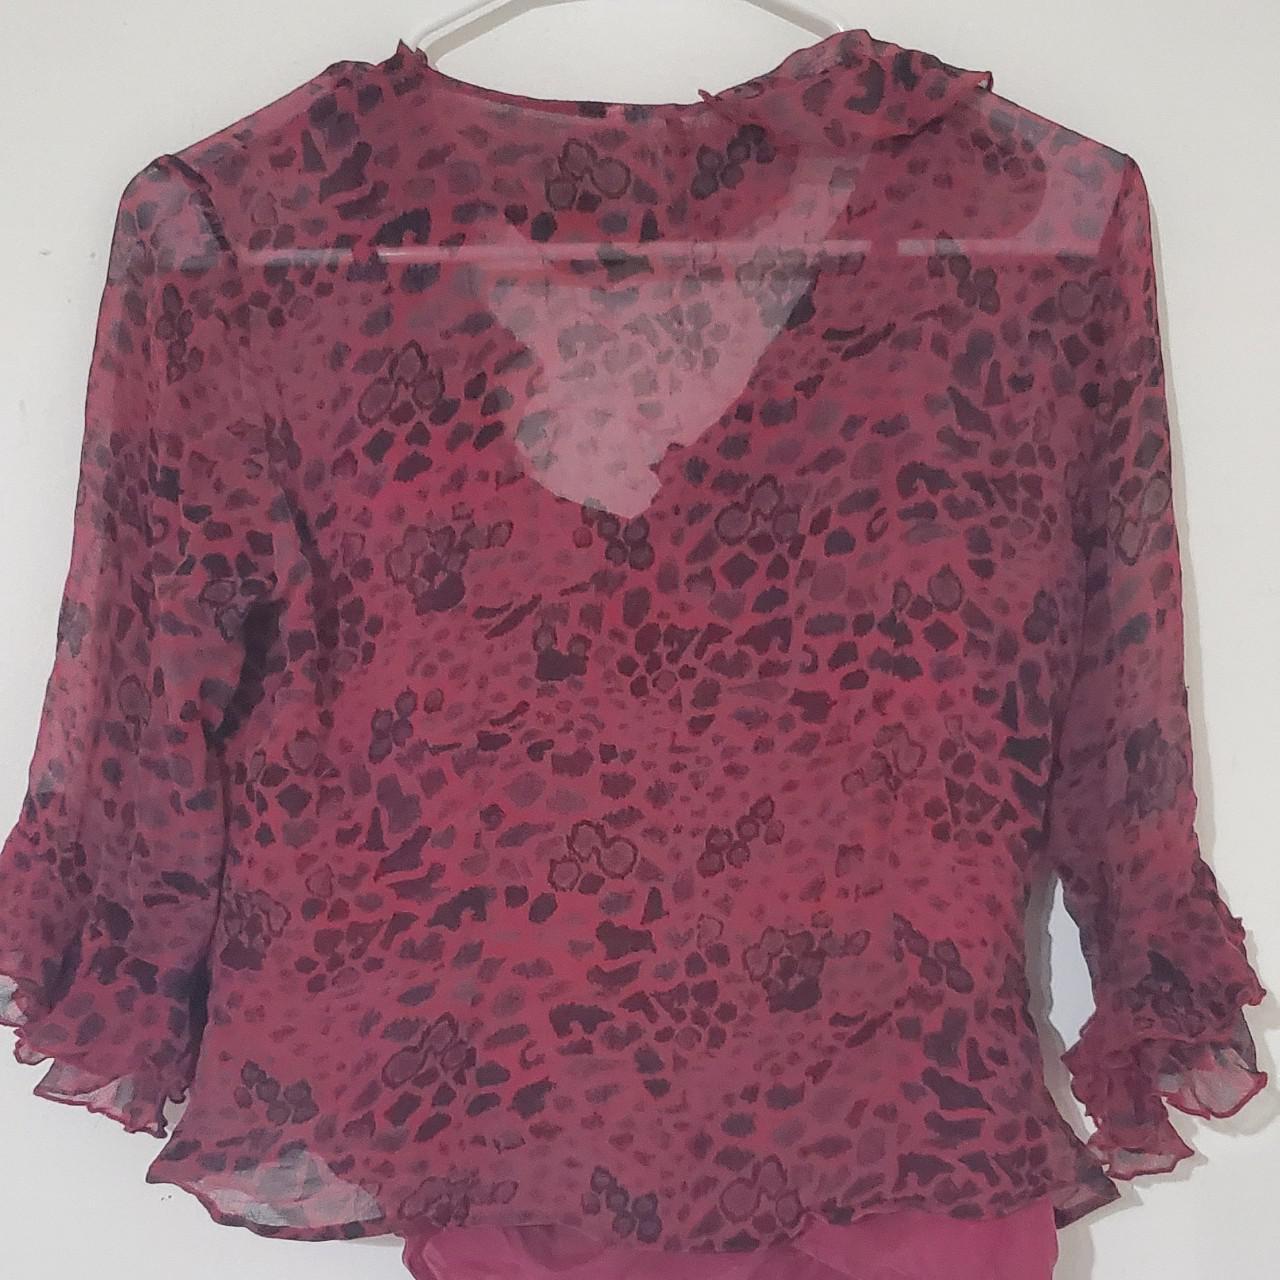 Product Image 2 - Top blouse lace 
Spaghetti top
#blouse
#top
#upcycle
#Y2k